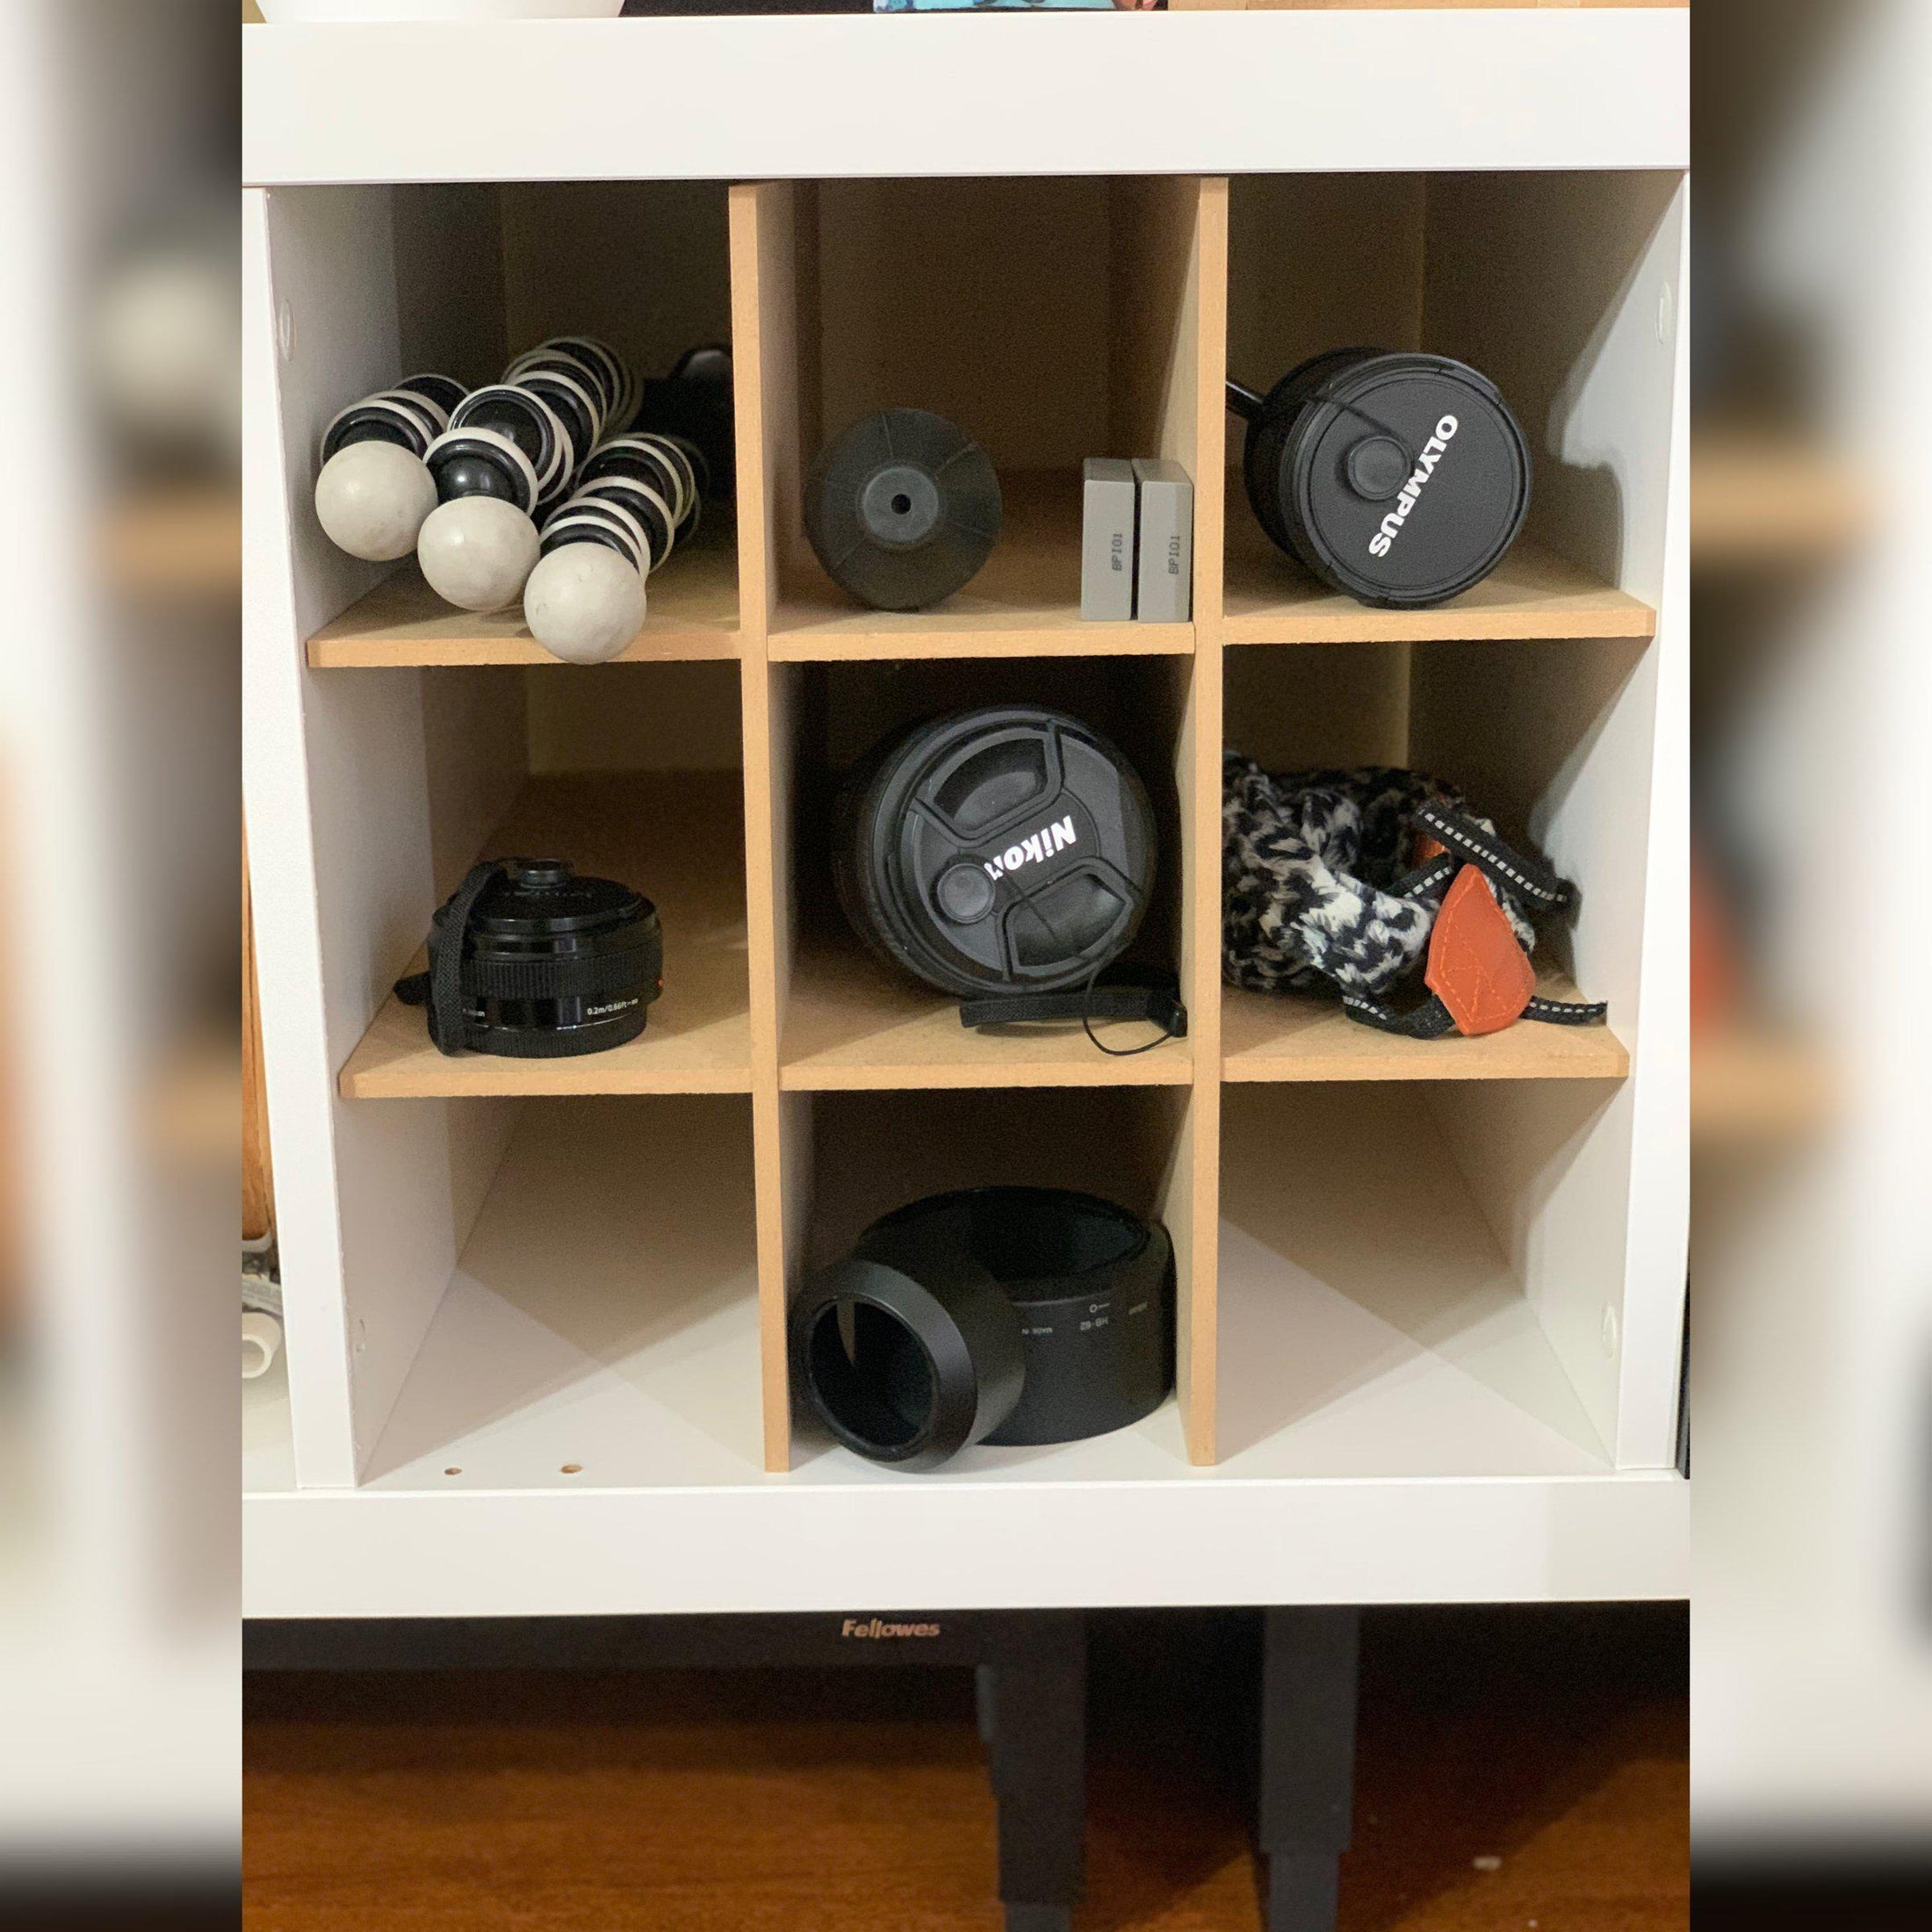 9 Cubby Cube Insert for Cube Storage Shelves storing camera accessories-The Steady Hand